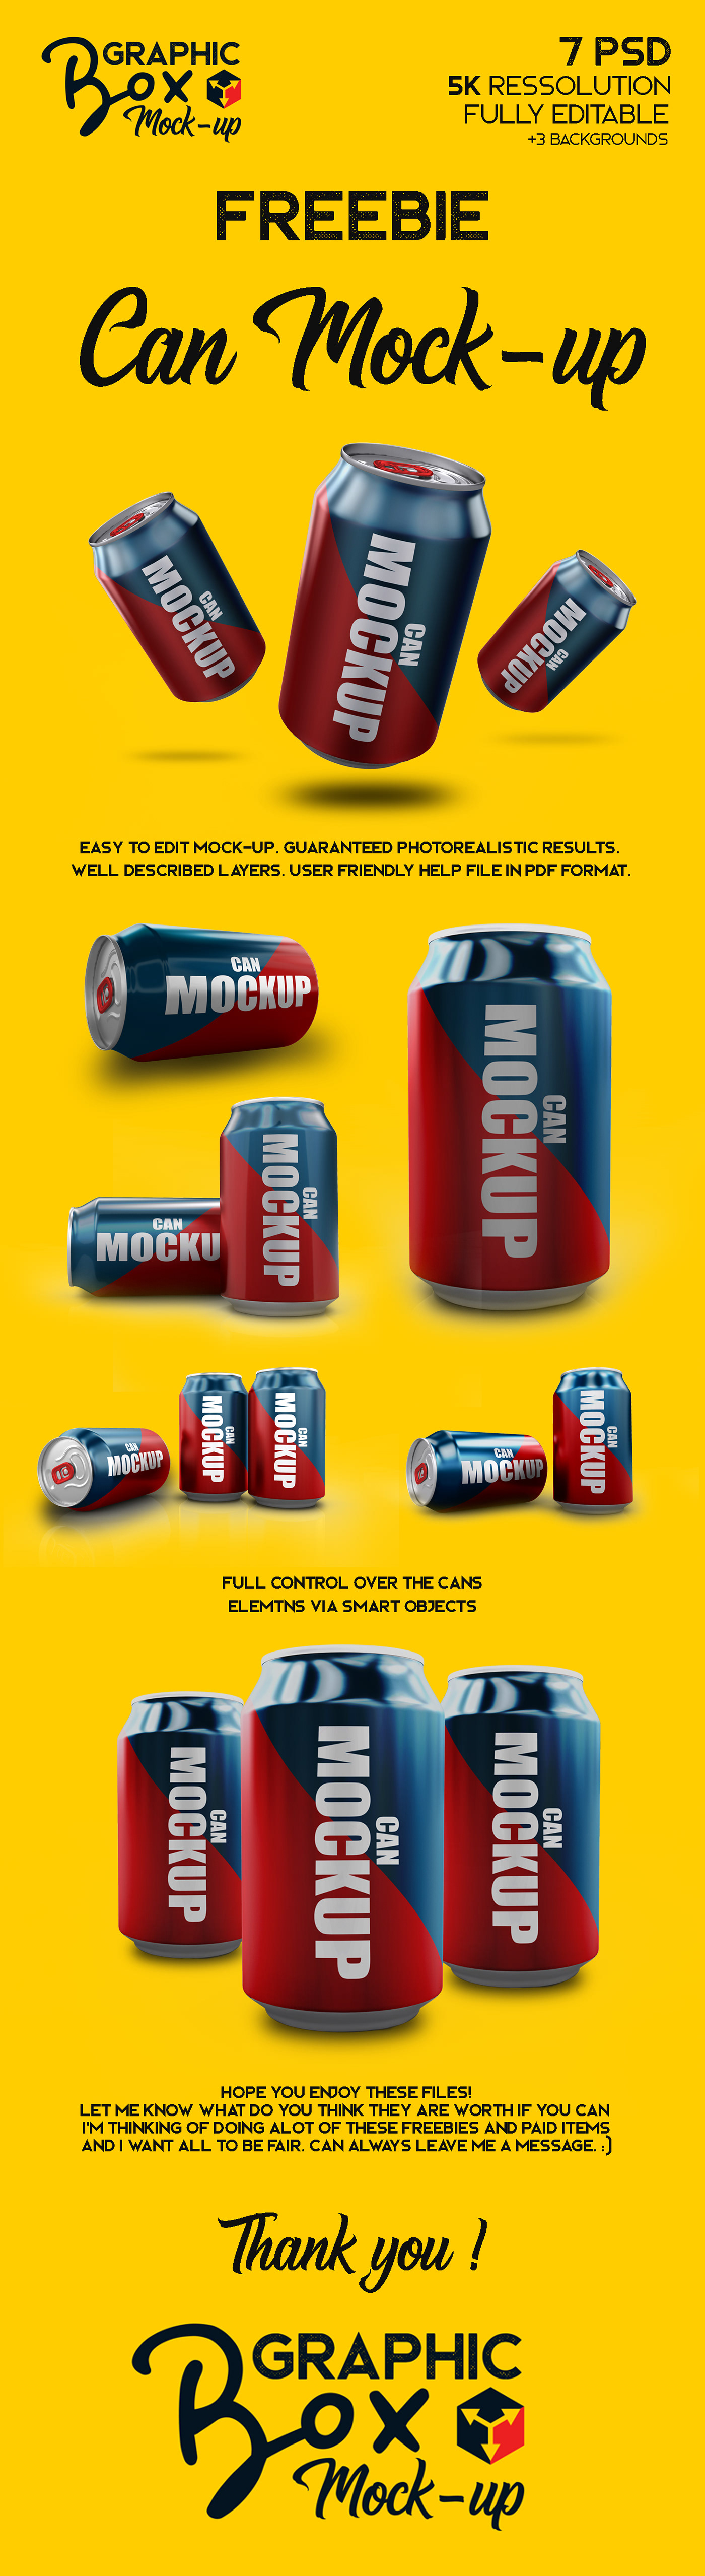 freebie can mockup graphicbox Mockup mock-up psd files Mock-up Can Soda Can Mock- u